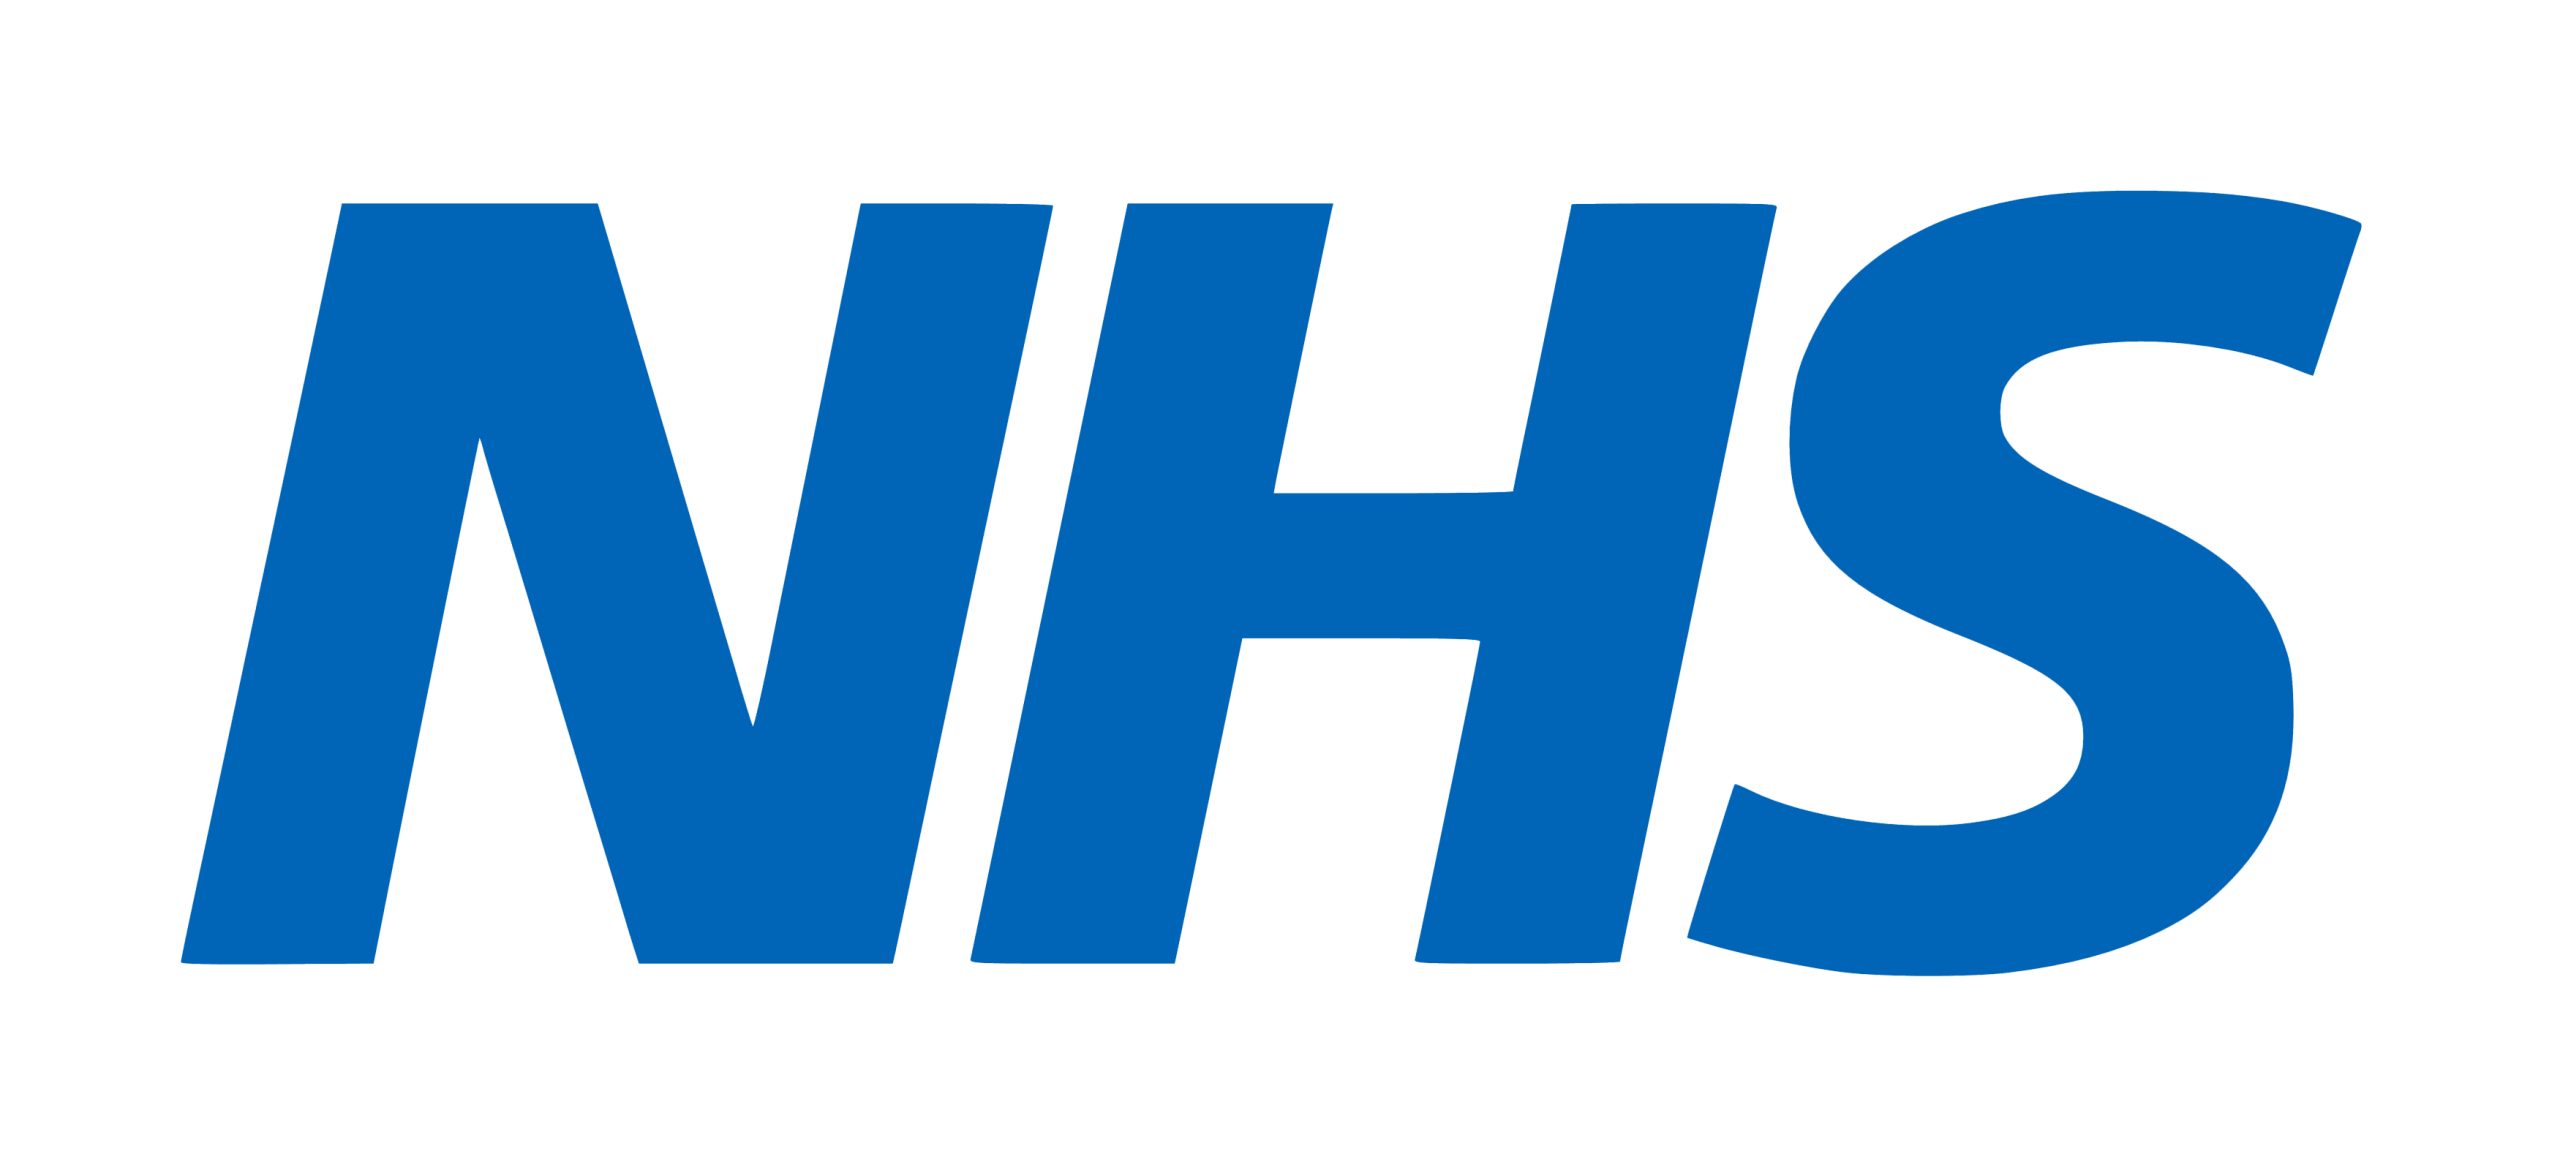 Share your views on Non-Emergency Patient Transport Services in Buckinghamshire, Oxfordshire and Berkshire West feature